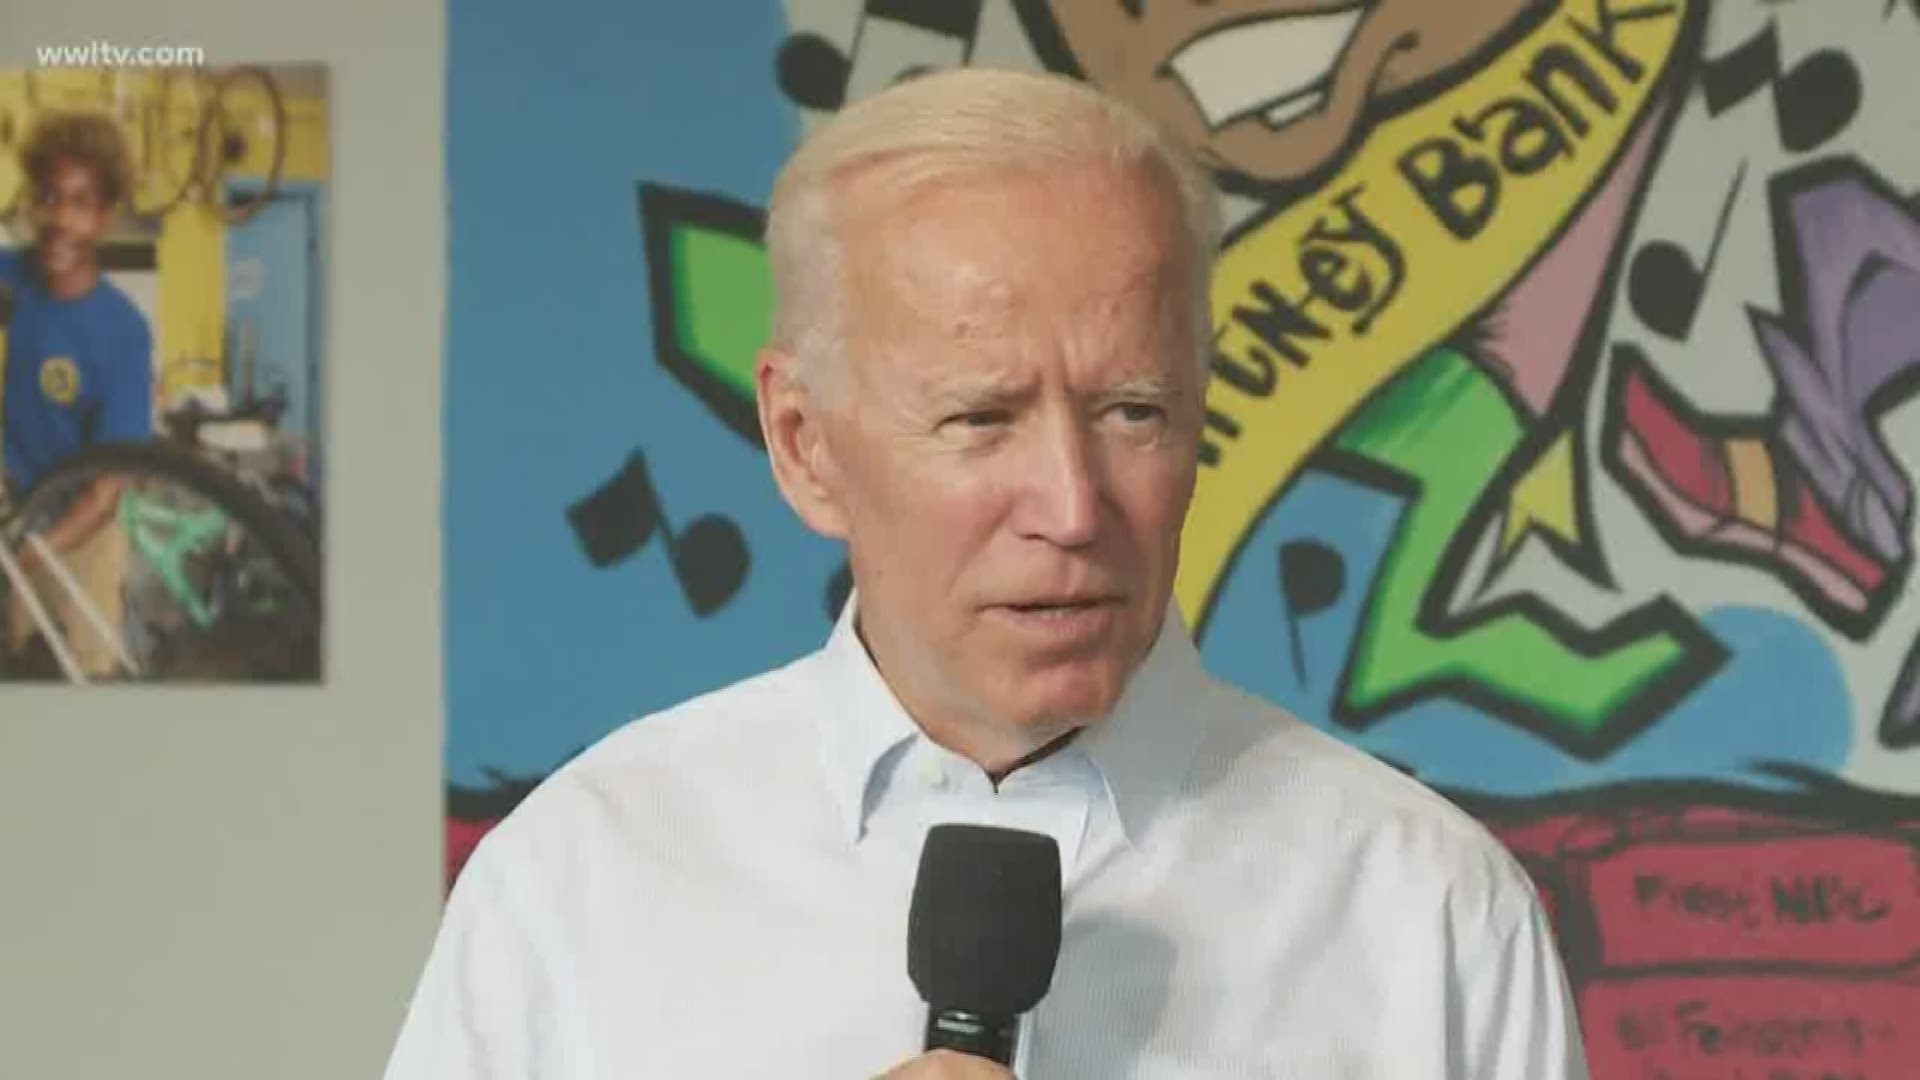 Former Vice-President Joe Biden was in New Orleans for his presidential campaign Tuesday.